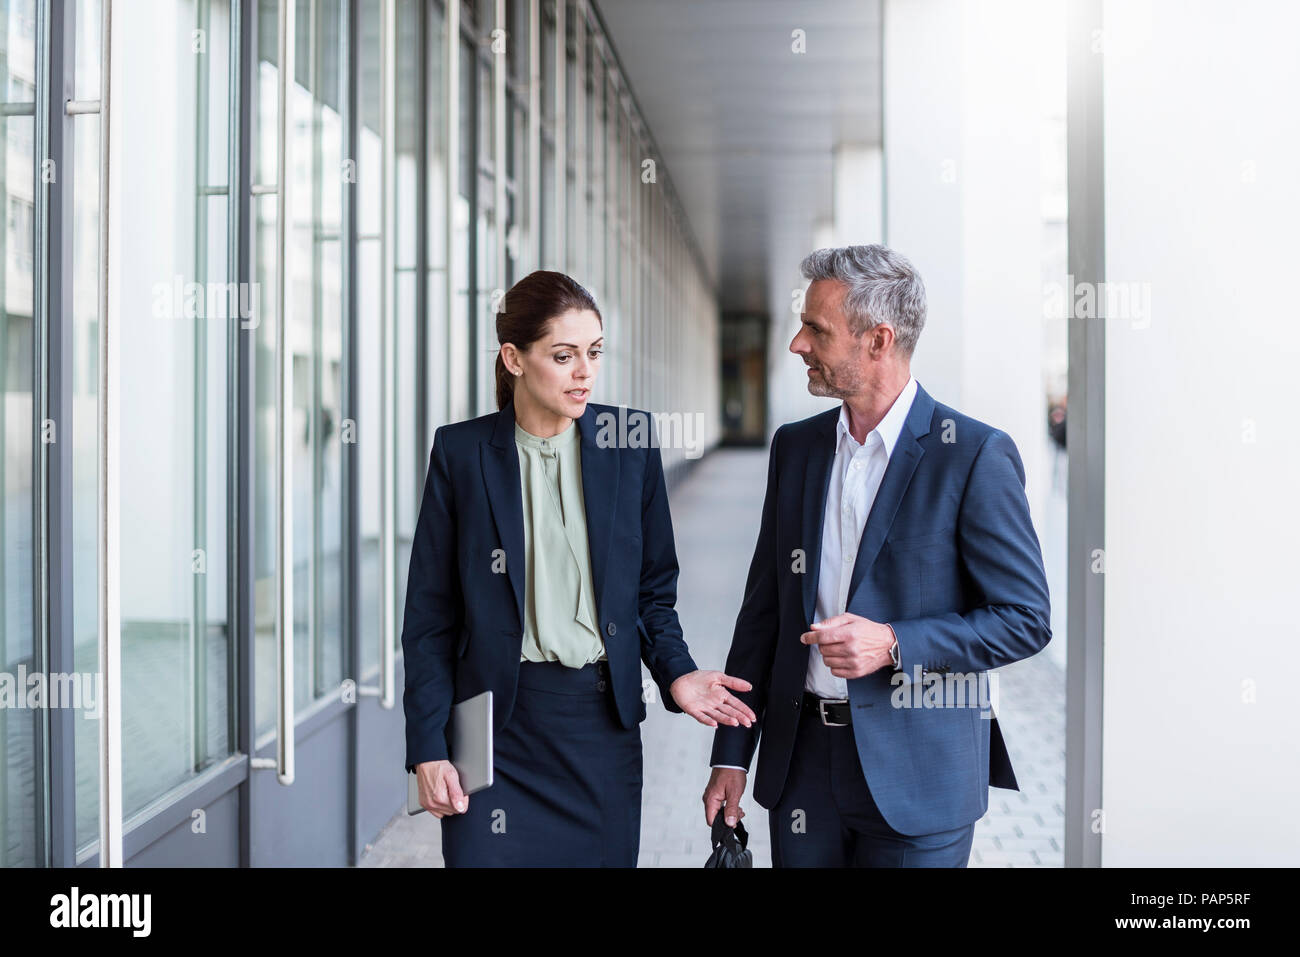 Two discussing business partners Stock Photo